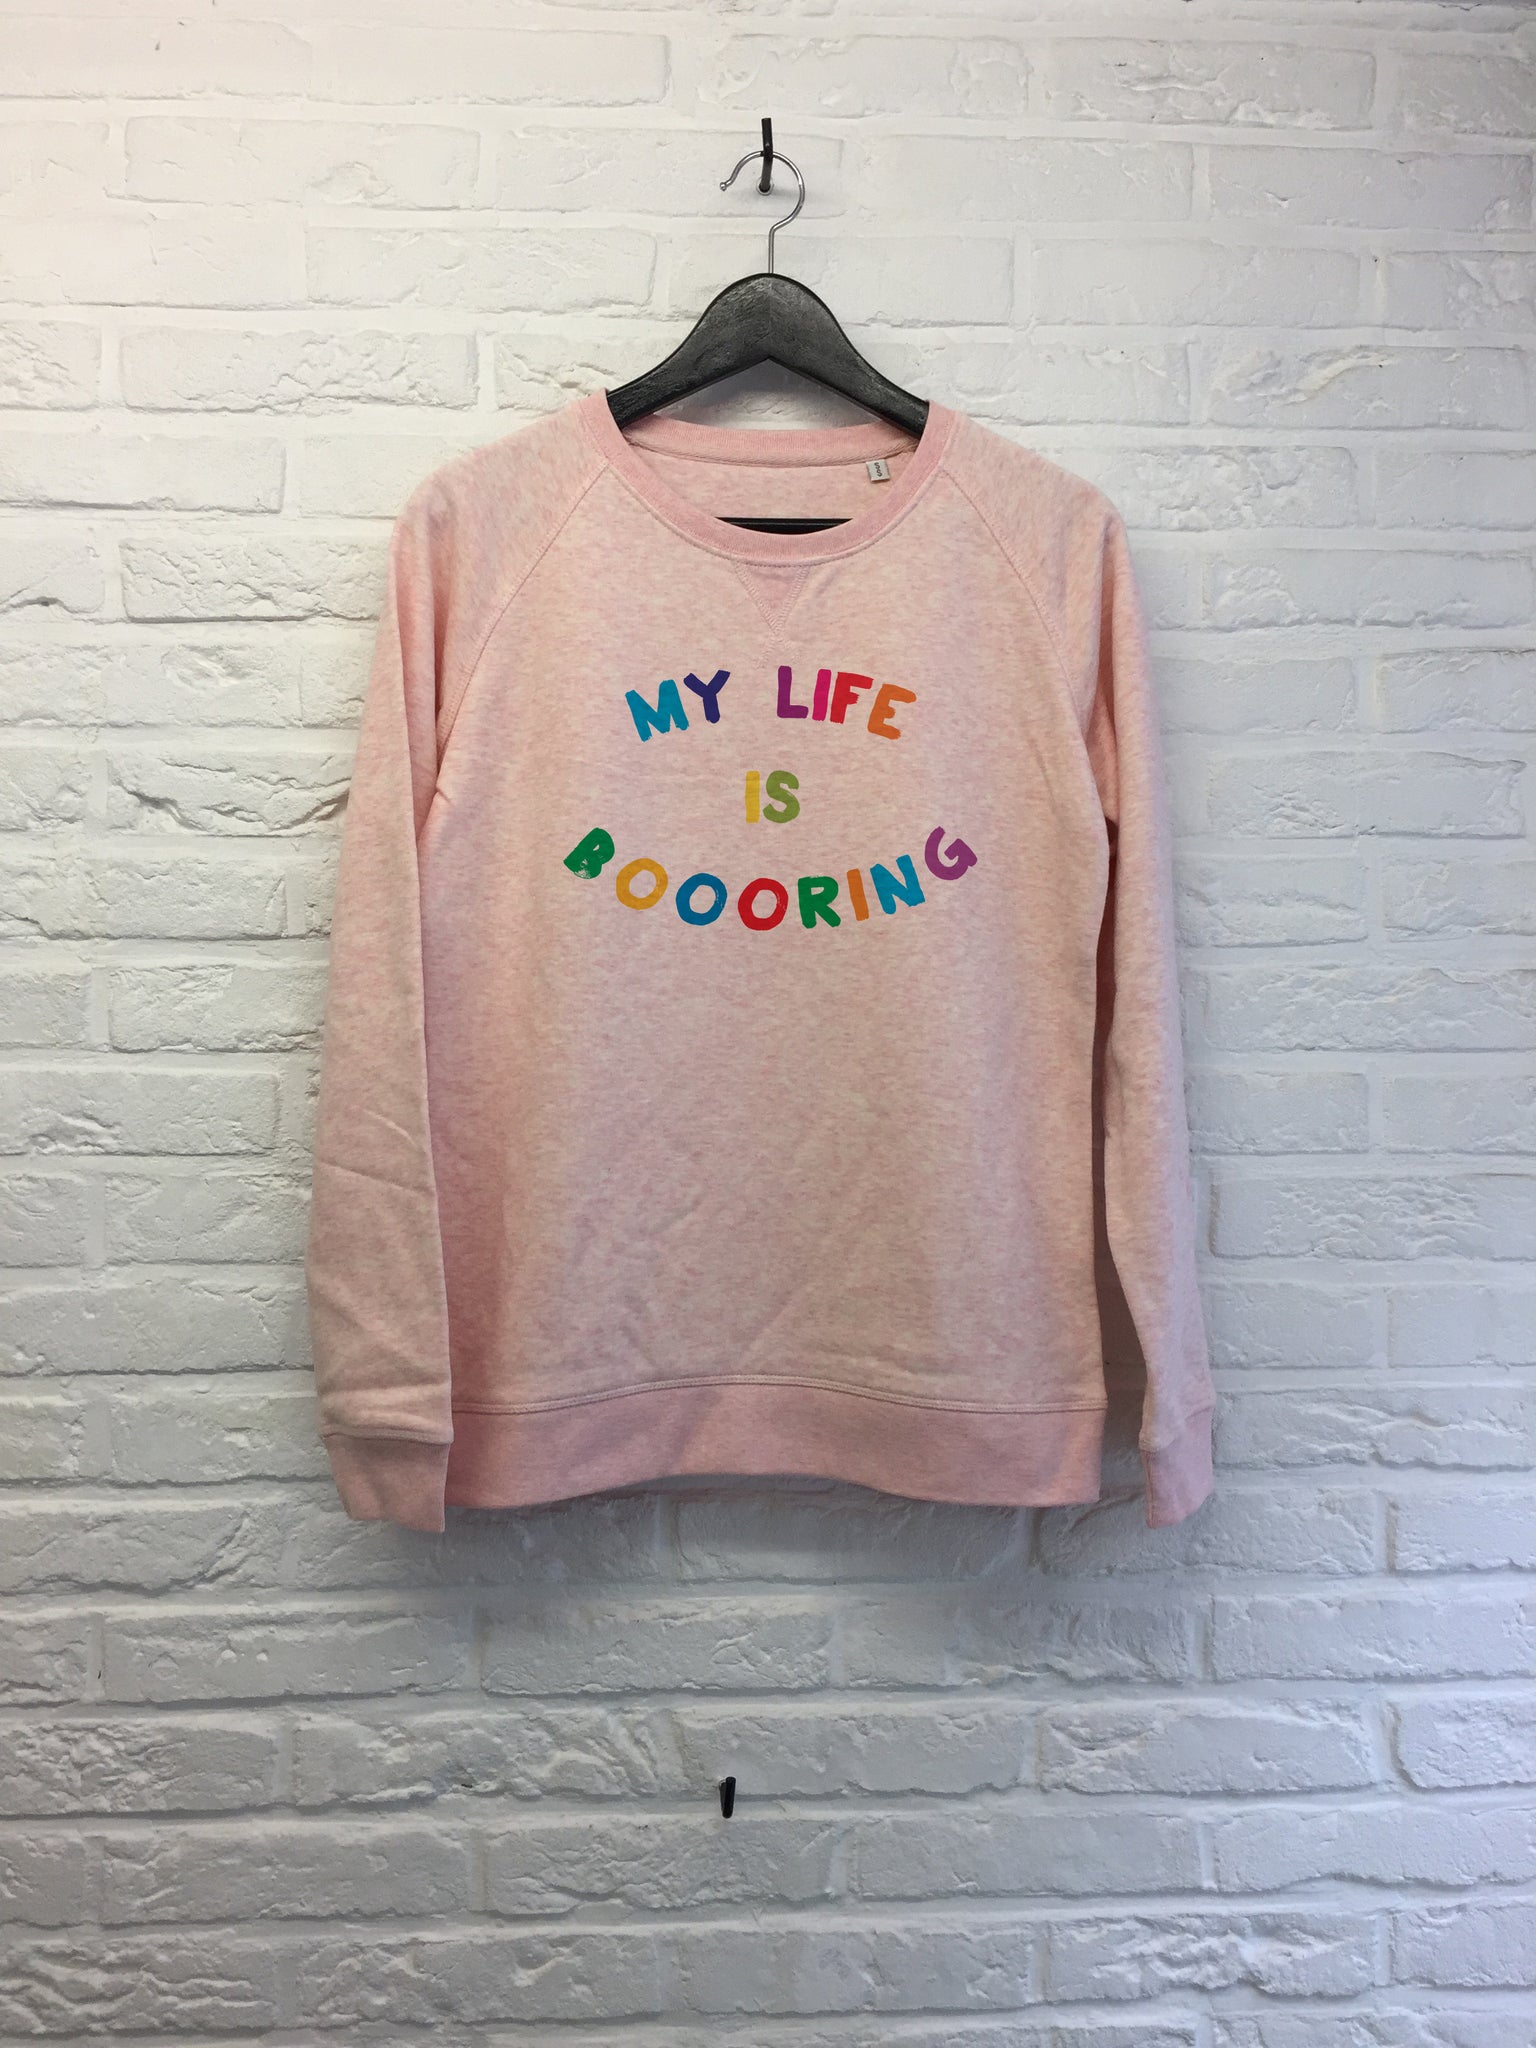 My life is boring - Sweat - Femme-Sweat shirts-Atelier Amelot